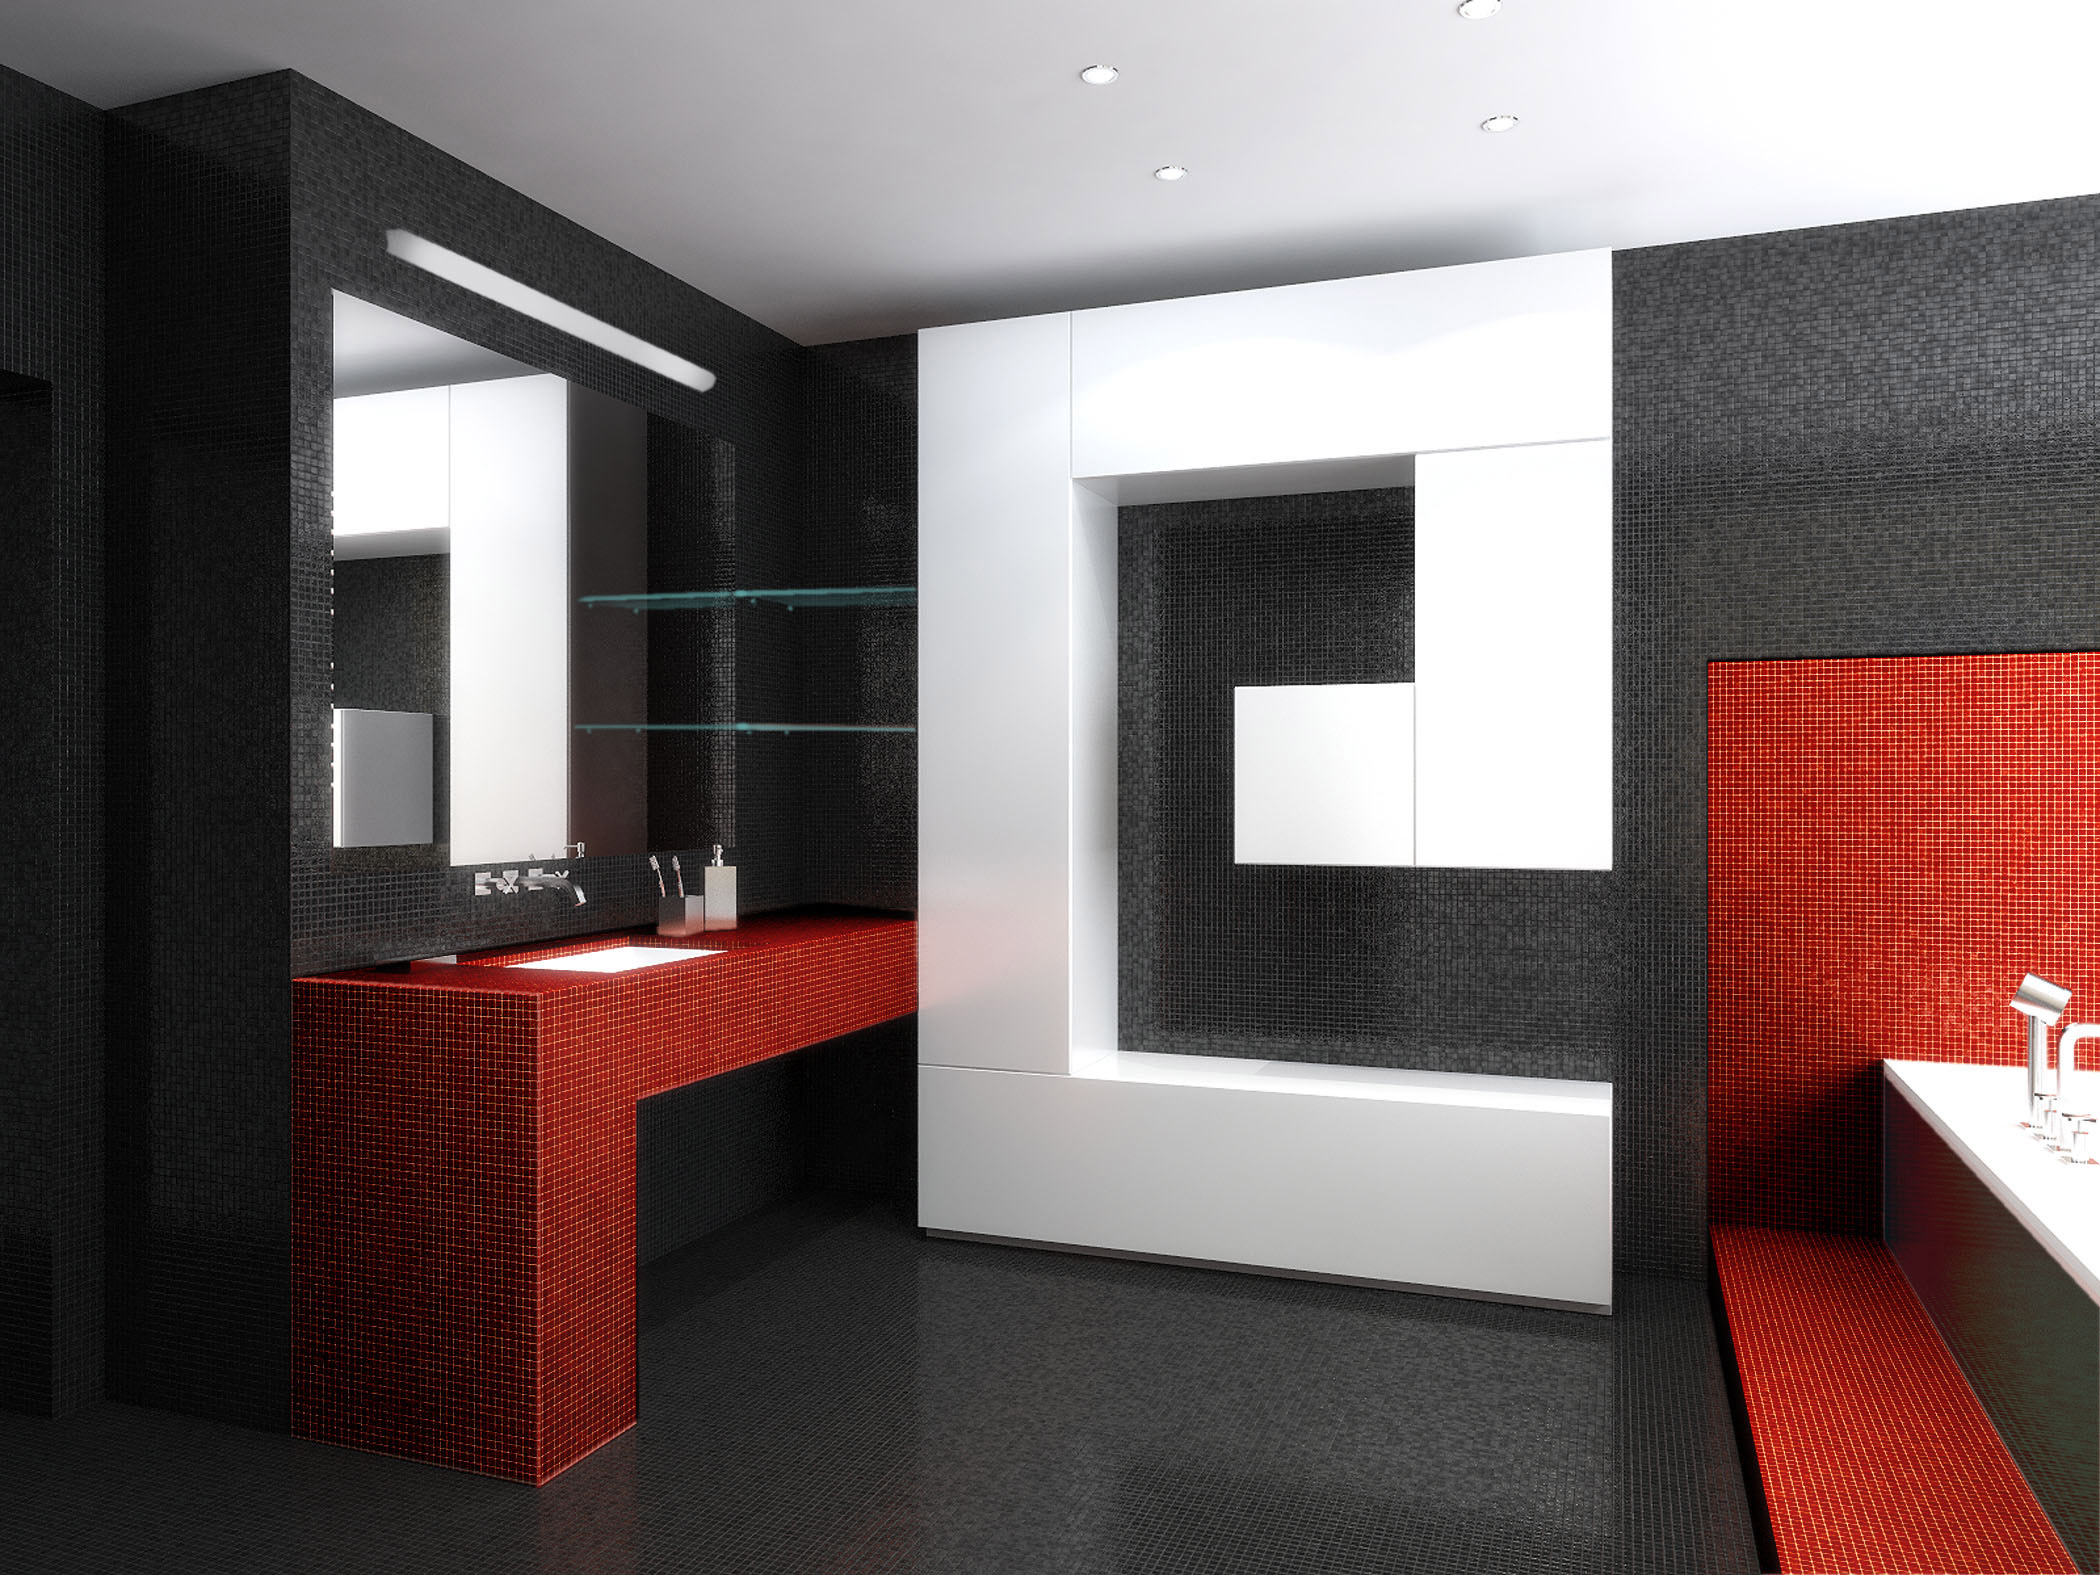 Black and white bathroom diluted in red